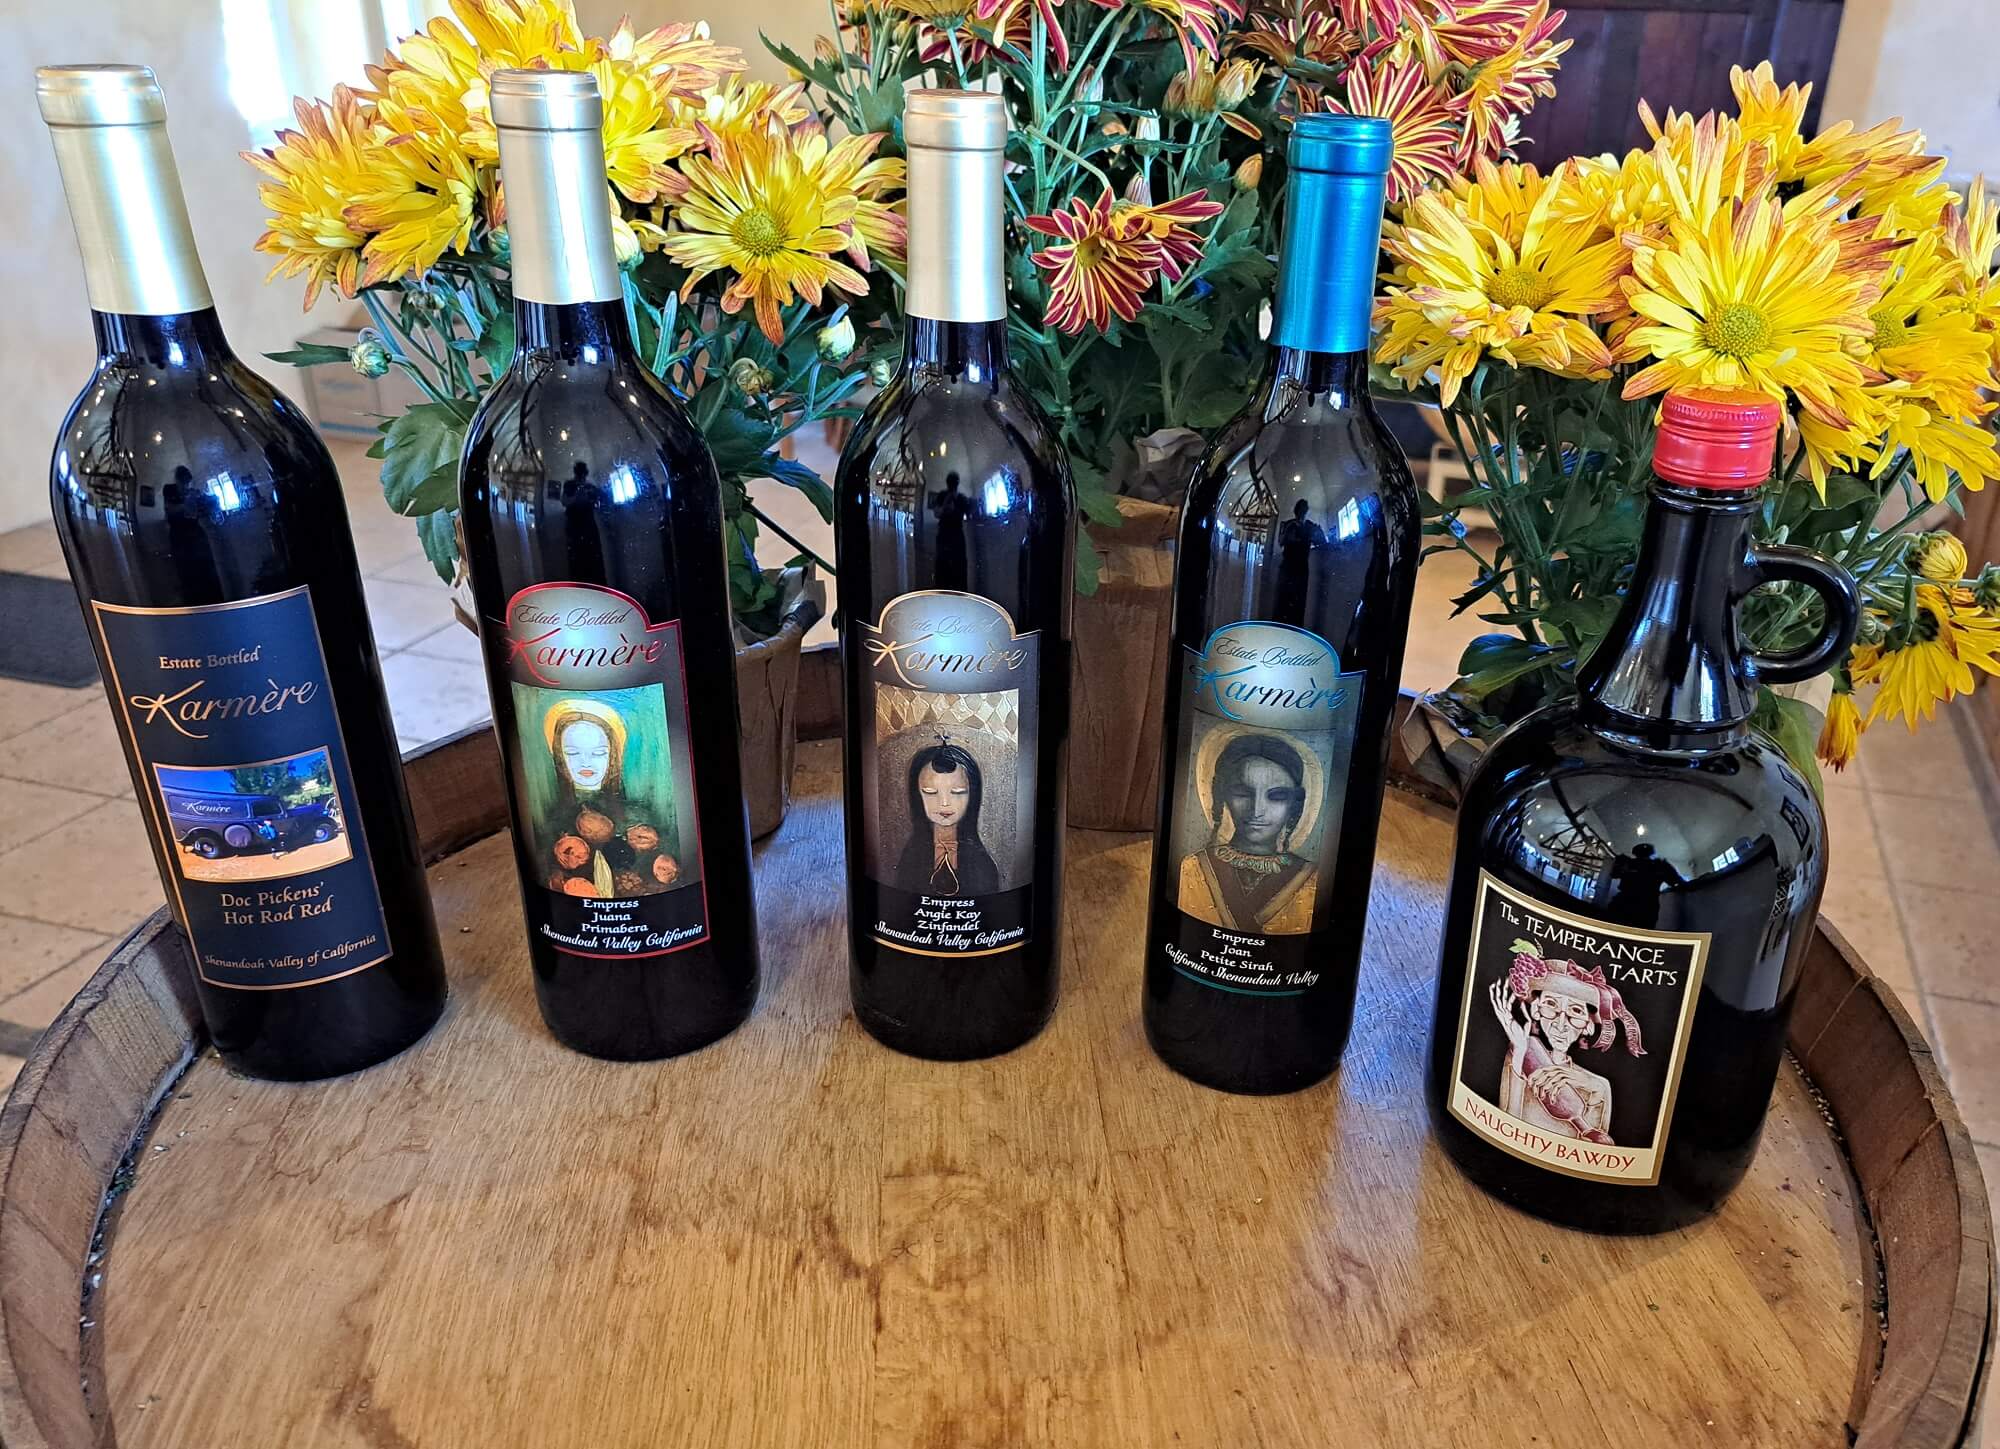 Lineup of red wines